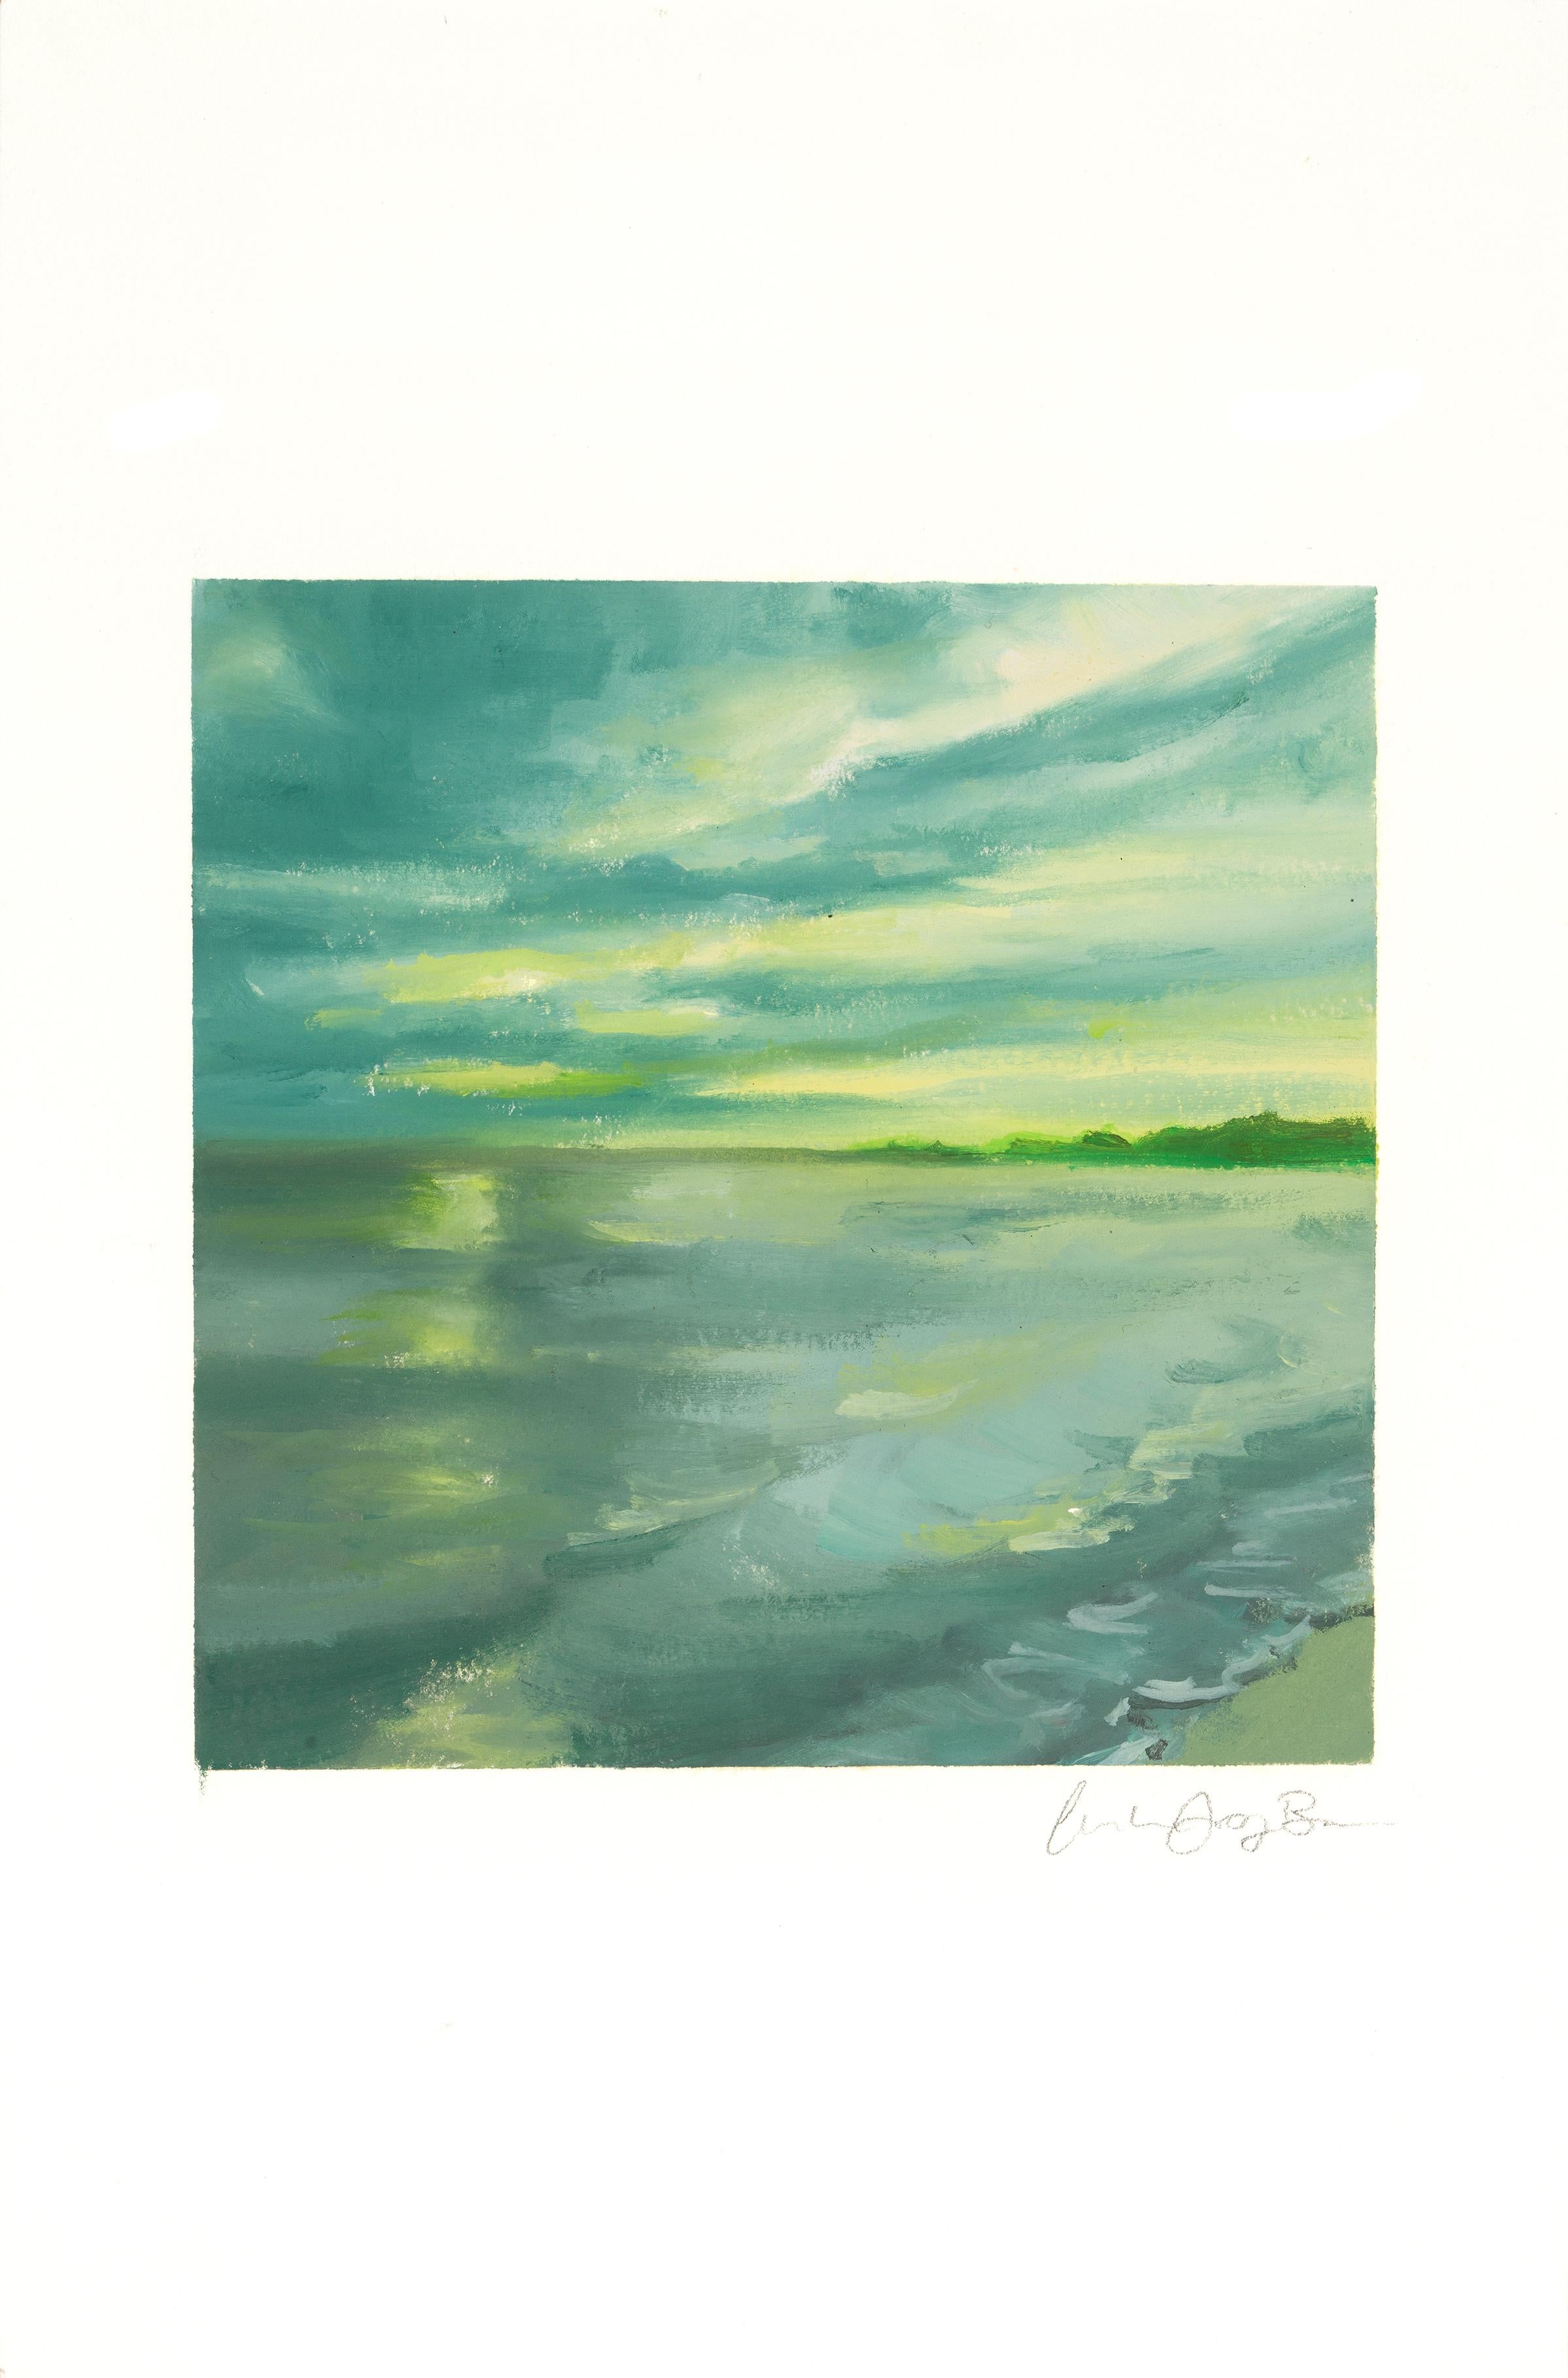 Amanda Joy Brown Landscape Painting - GREEN DUSK - Phthalo Painting of Morning View Ocean w/ Clouds, Sea, & Trees